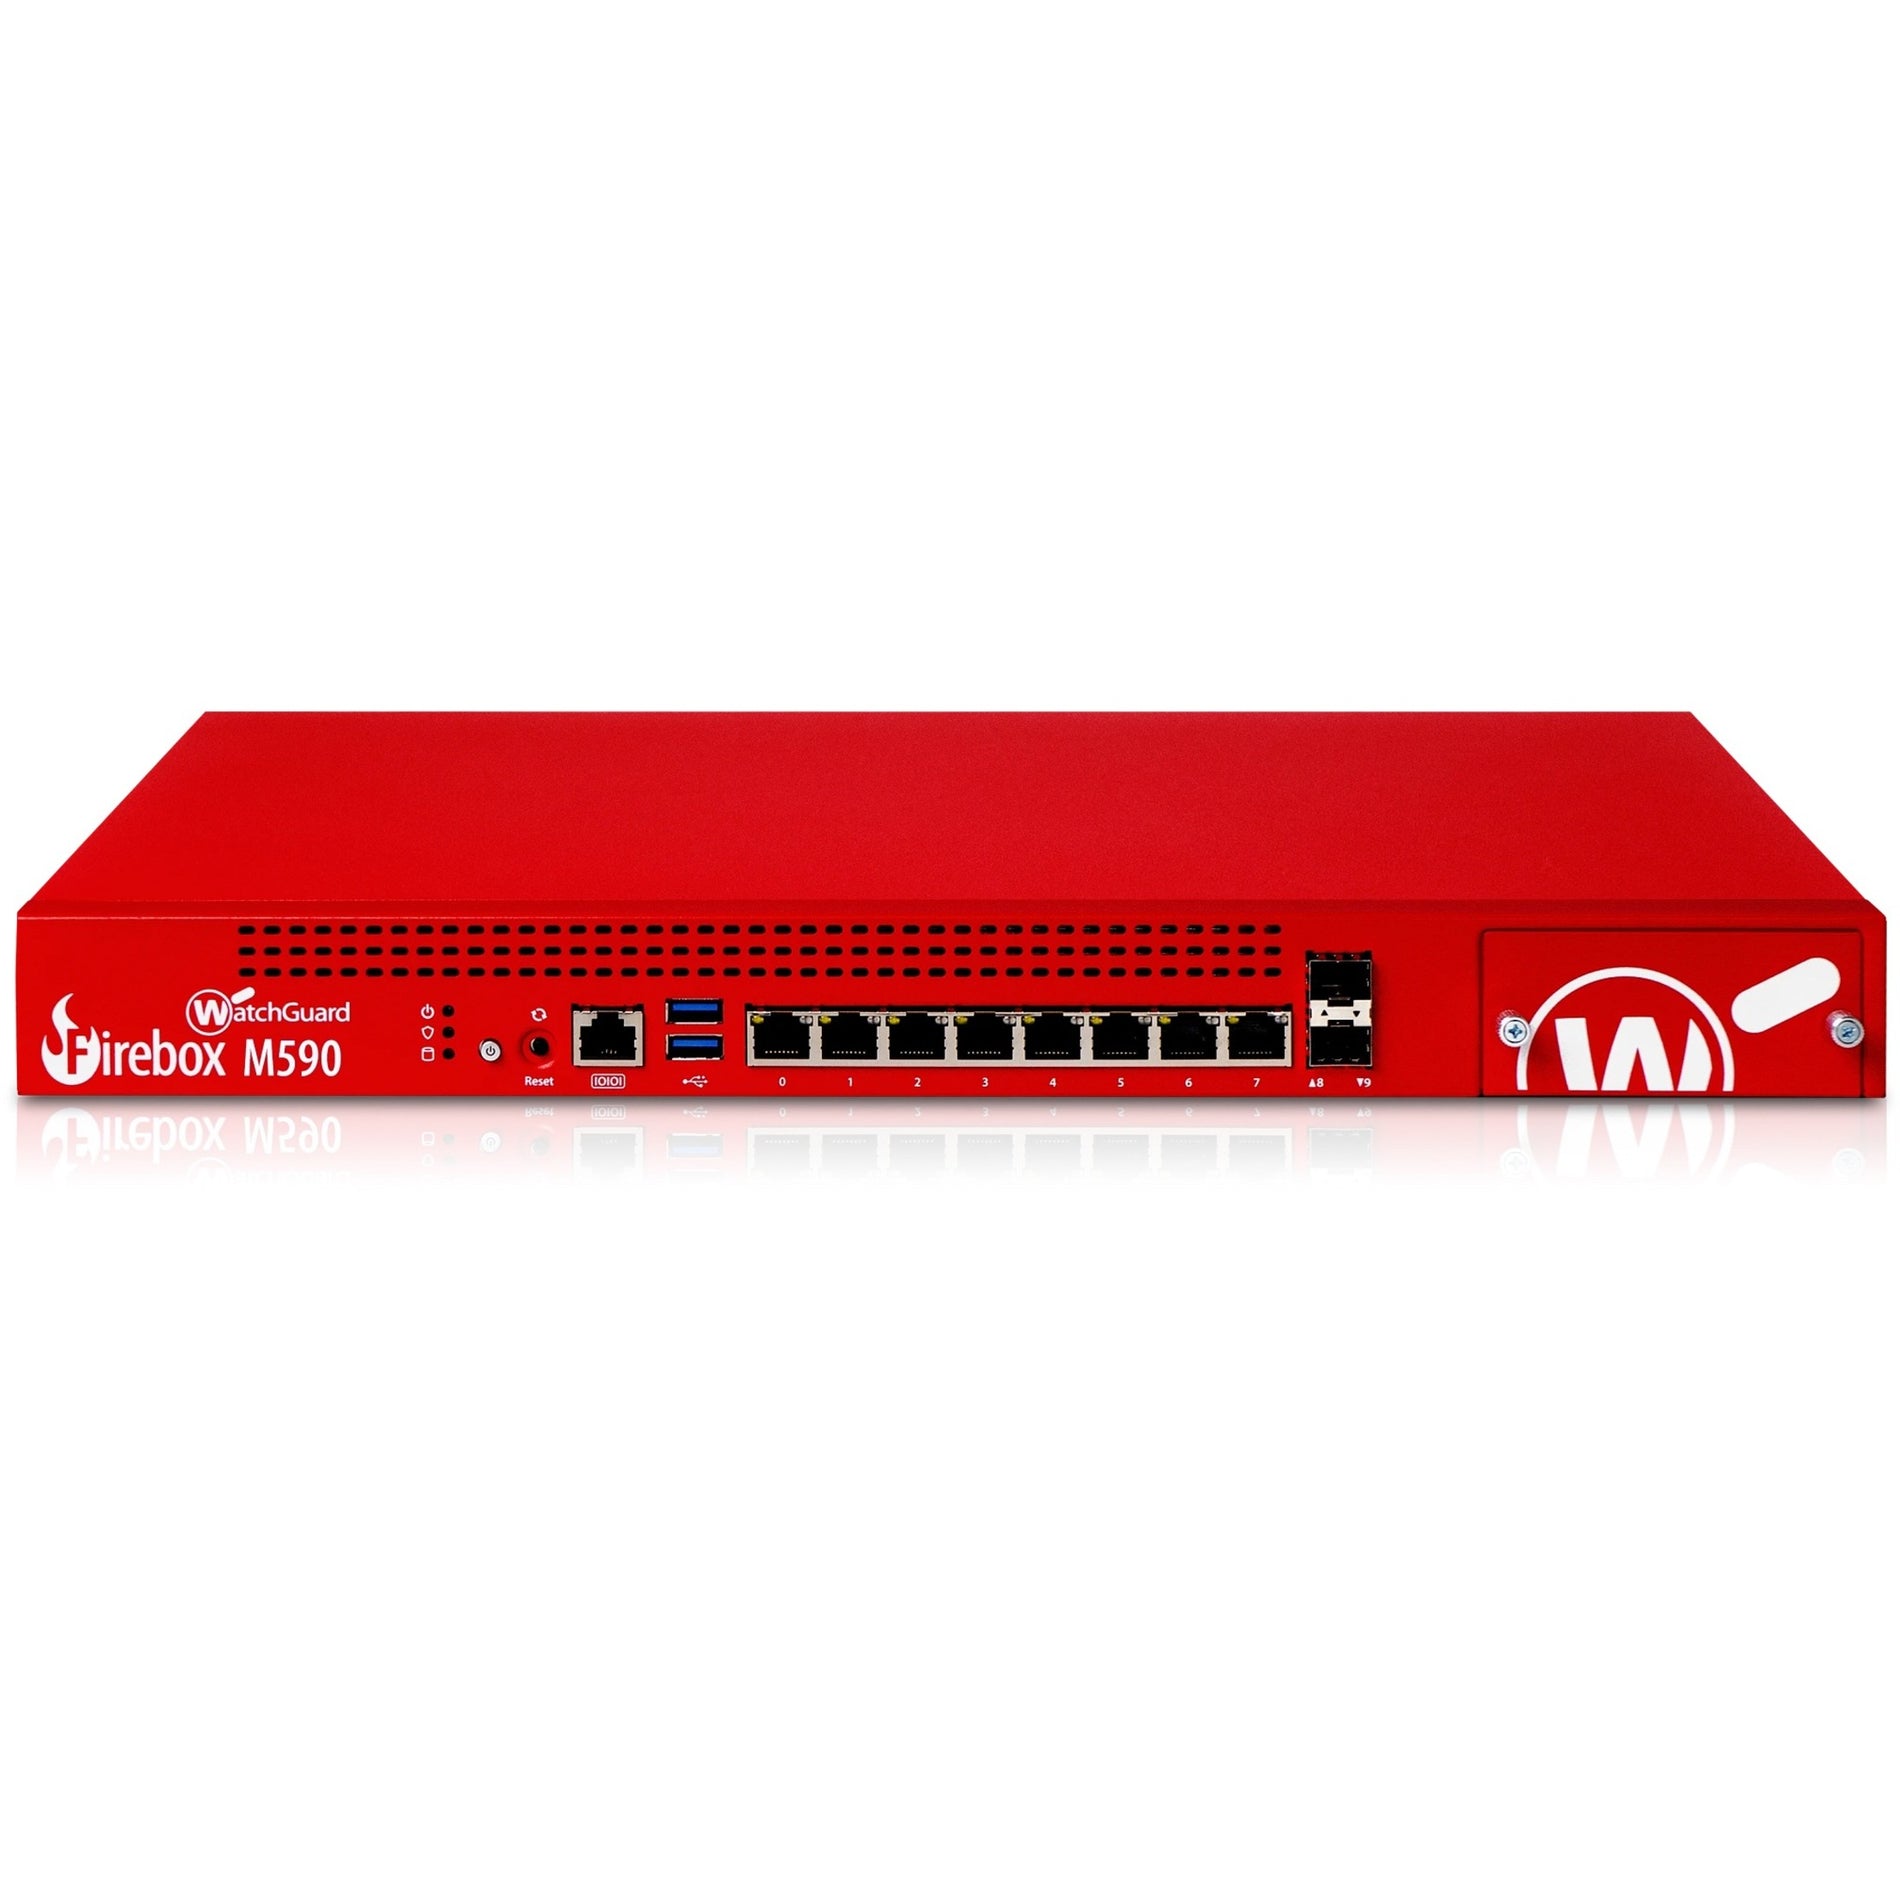 WatchGuard WGM59002003 Firebox M590 Network Security/Firewall Appliance, 8 Ports, 3-Year Basic Security Suite